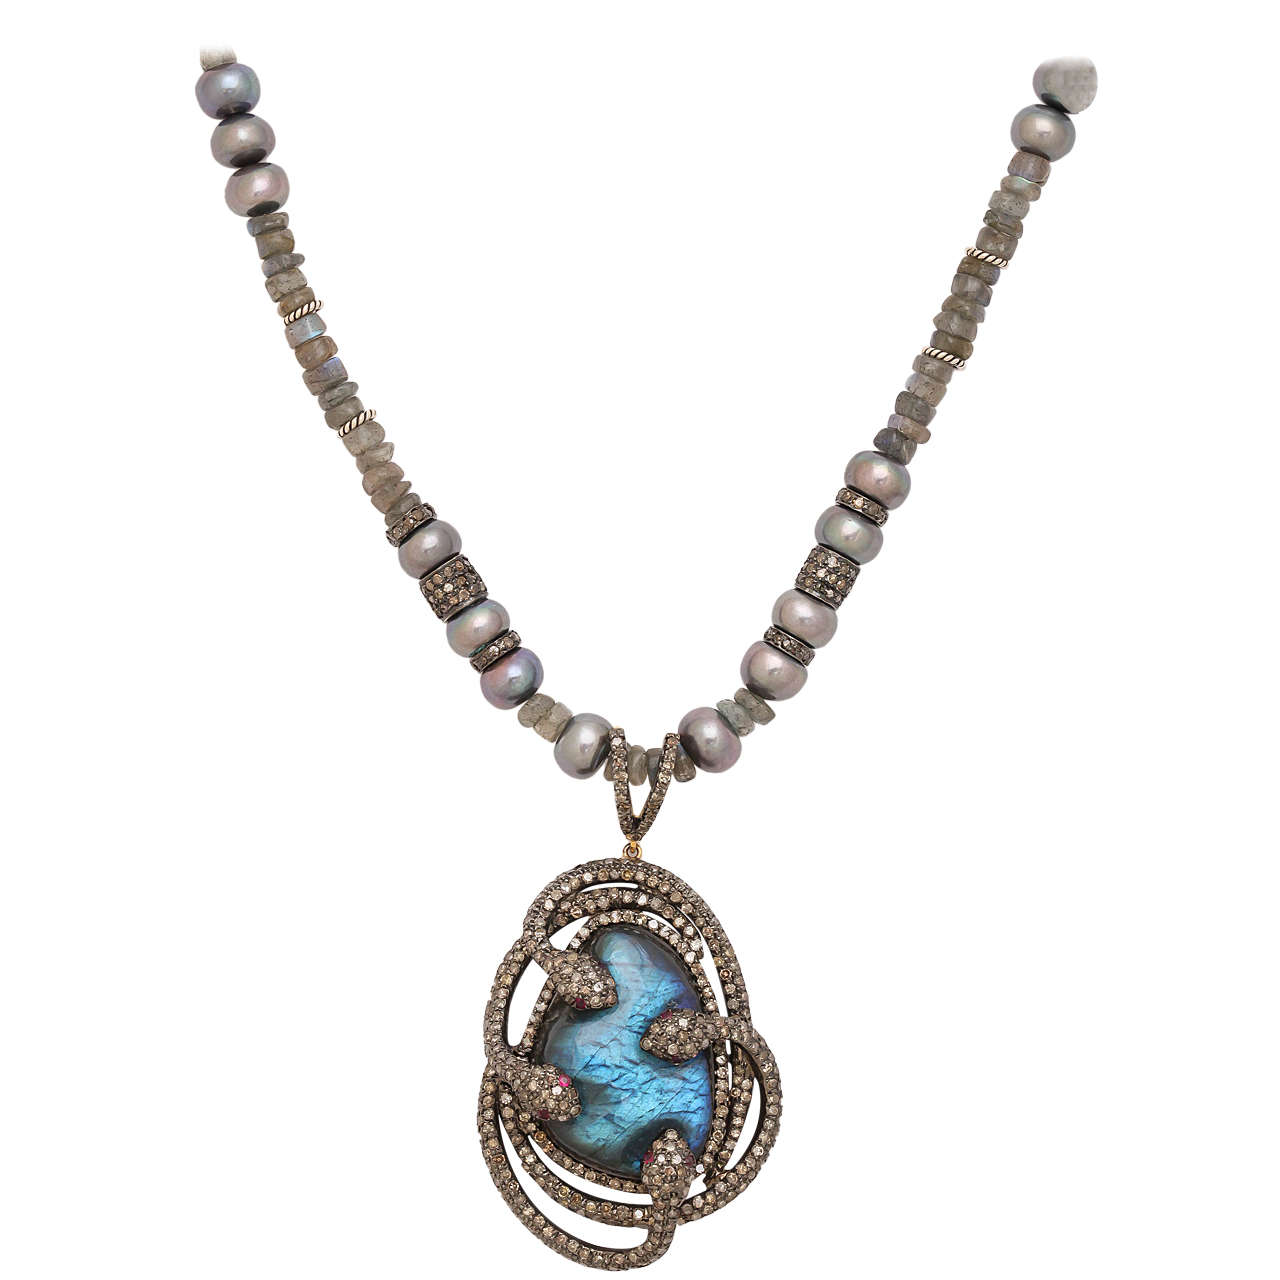 Beautifully designed diamond and labradorite pendant with 4 interlocking snakes.
The exotic piece hangs from a labradorite bead, silver, and gray fresh water pearls. The rondeles on the necklace are silver and rose cut diamonds. Total diamond weight